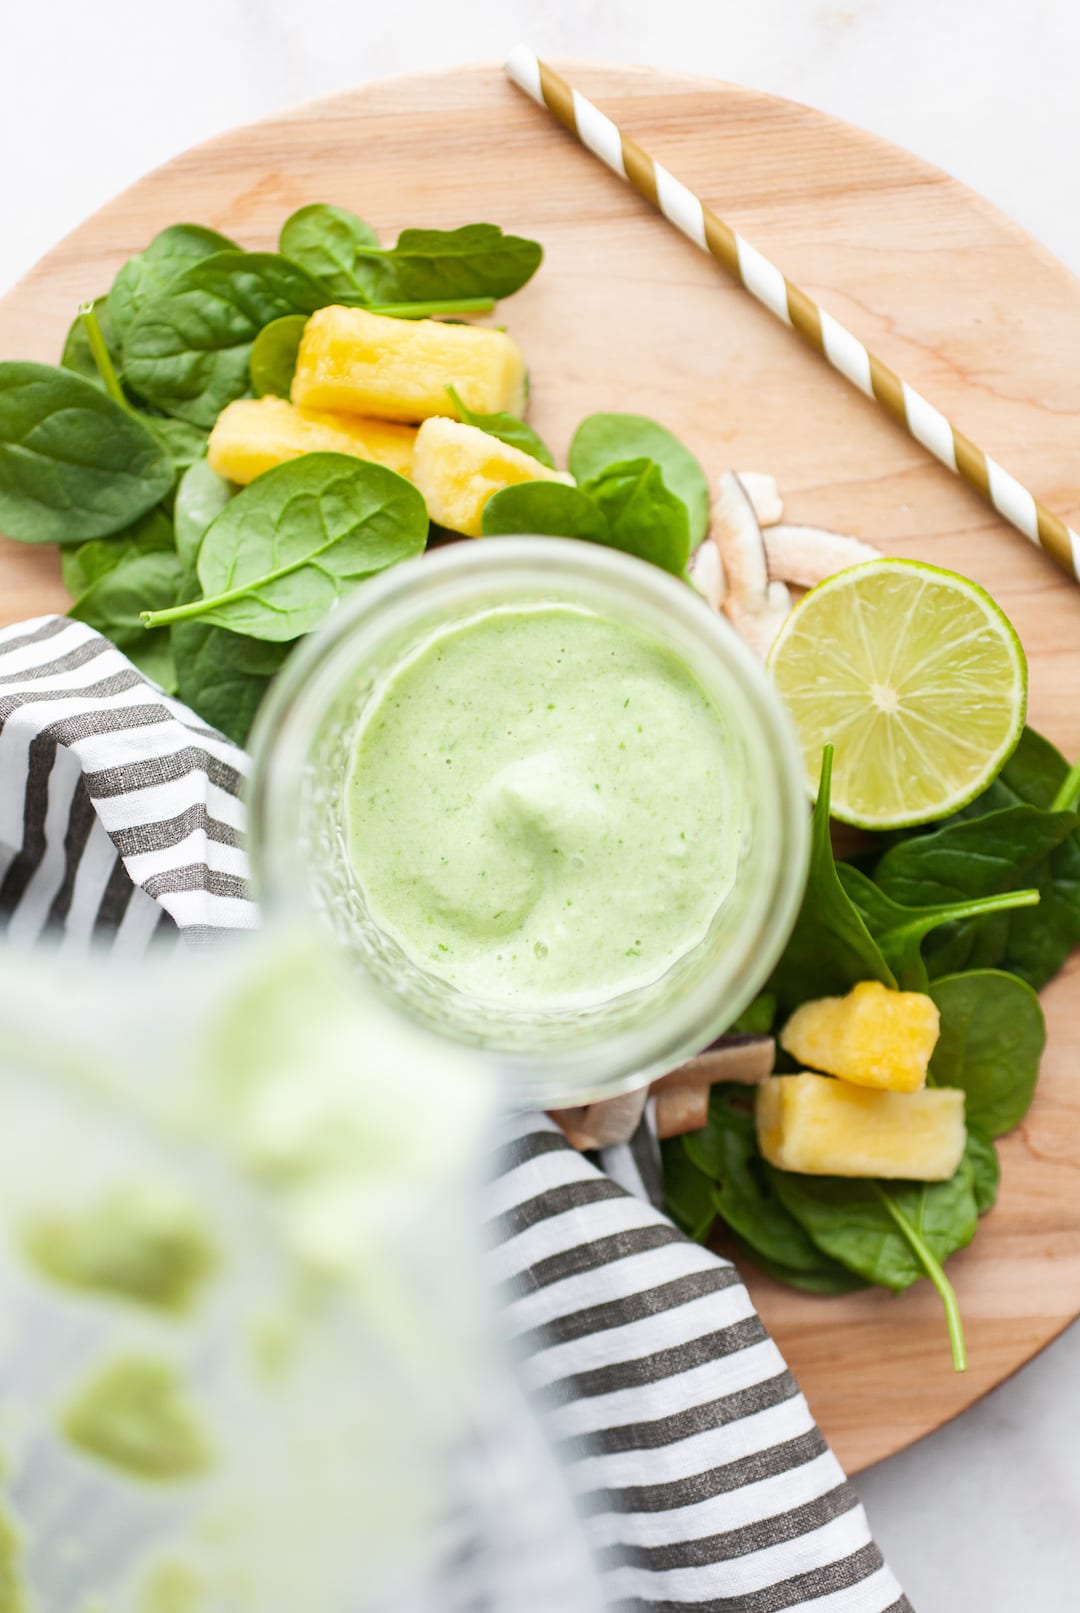 image of an overhead view of a glass jar being filled with a green smoothie poured from a blender canister and spinach, lime, and pineapple surrounding